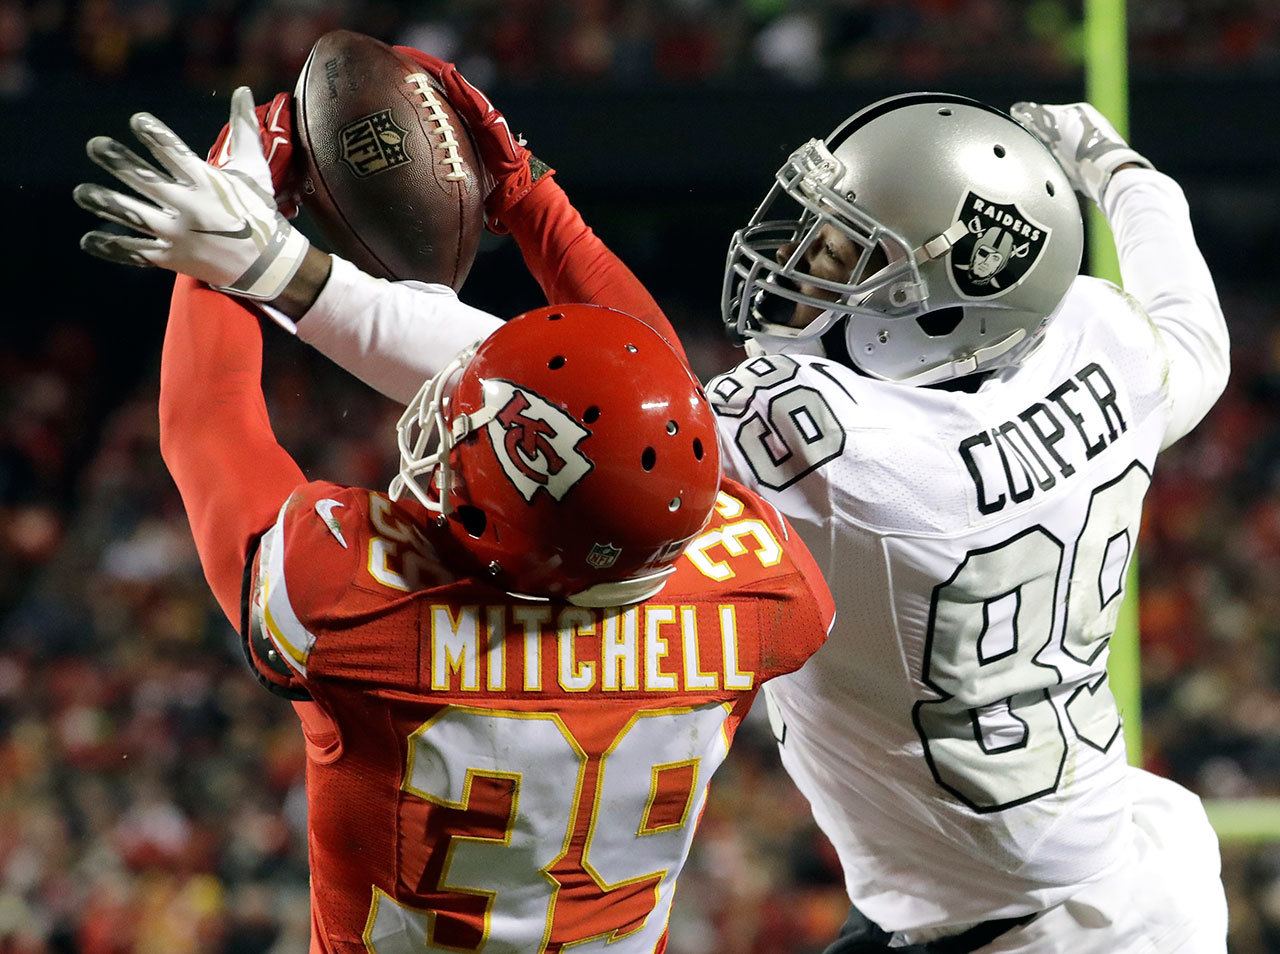 Chiefs defensive back Keith McGill II (39) nearly intercepts a pass intended for Raiders wide receiver Amari Cooper (89) during the first half of a game Thursday in Kansas City, Mo. (AP Photo/Charlie Riedel)